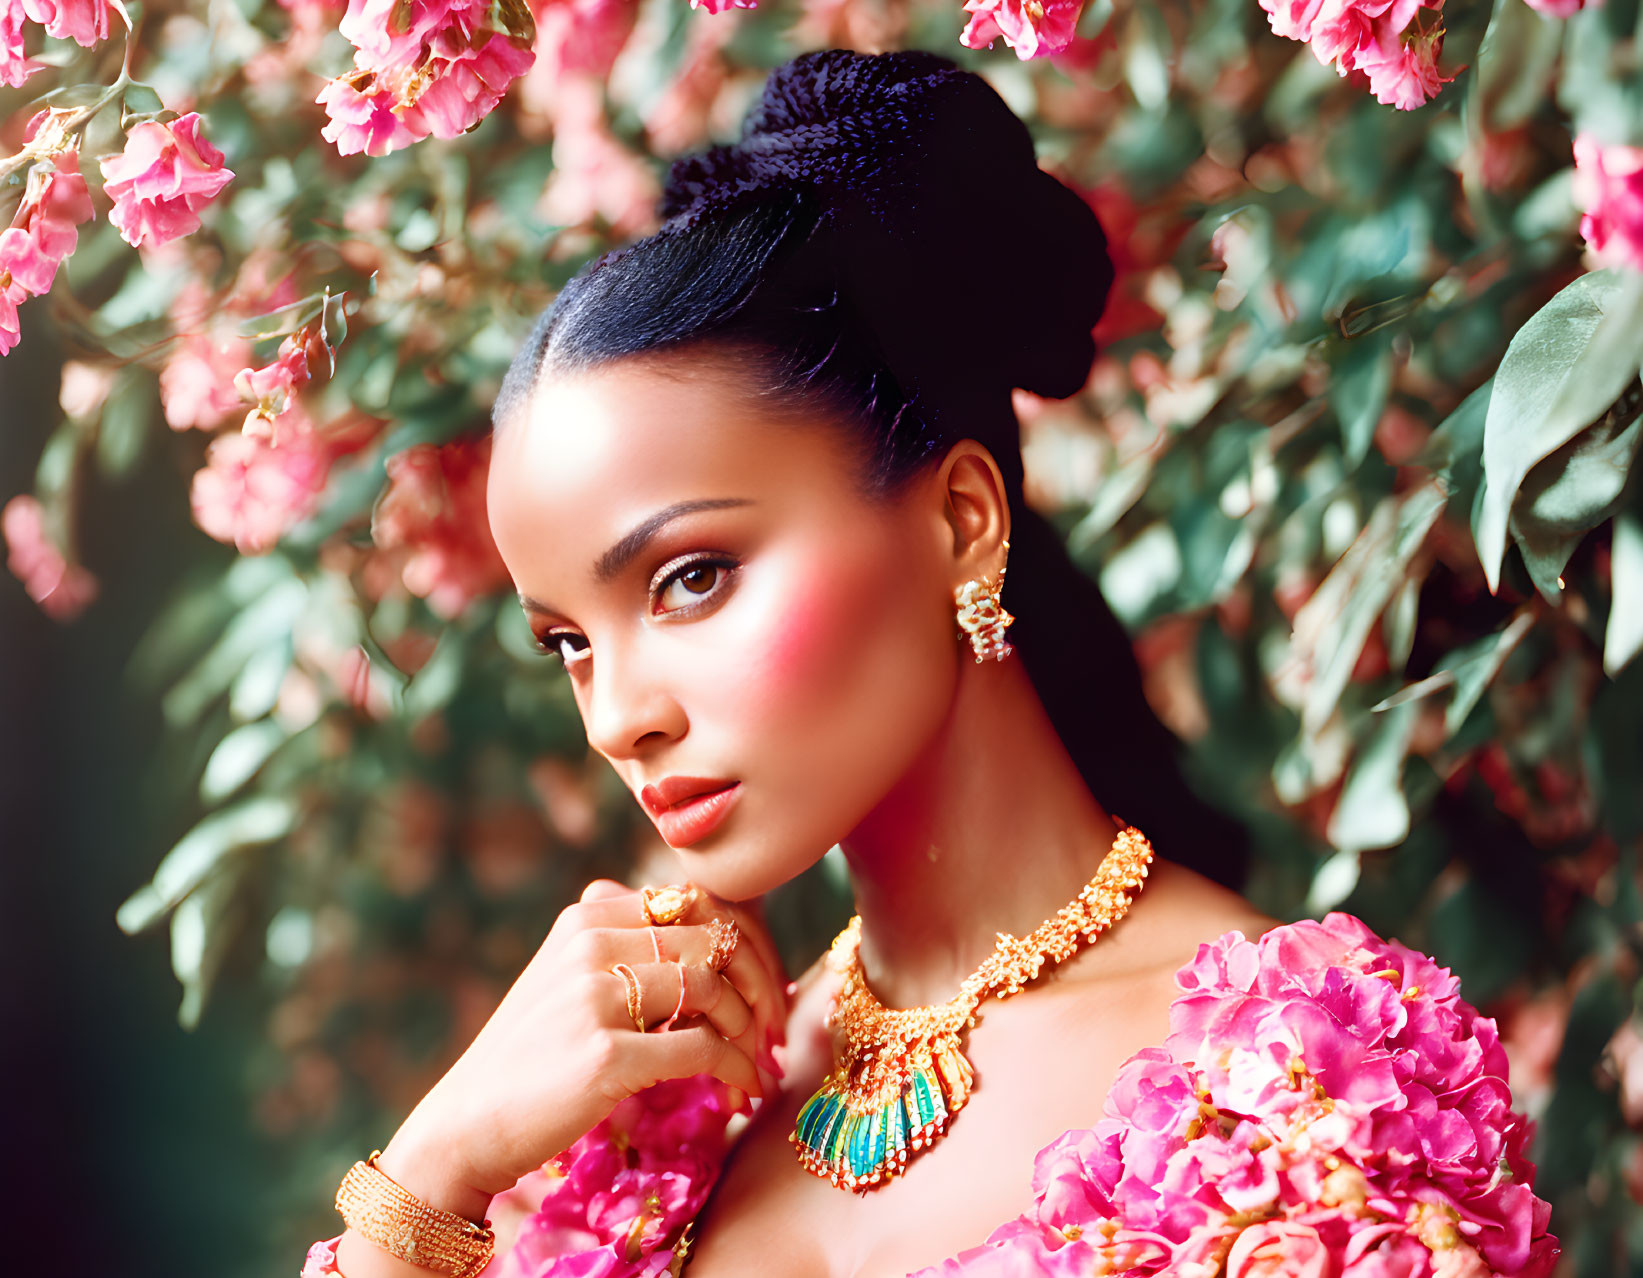 Woman with Bun Hairstyle and Gold Jewelry Poses Among Pink Flowers